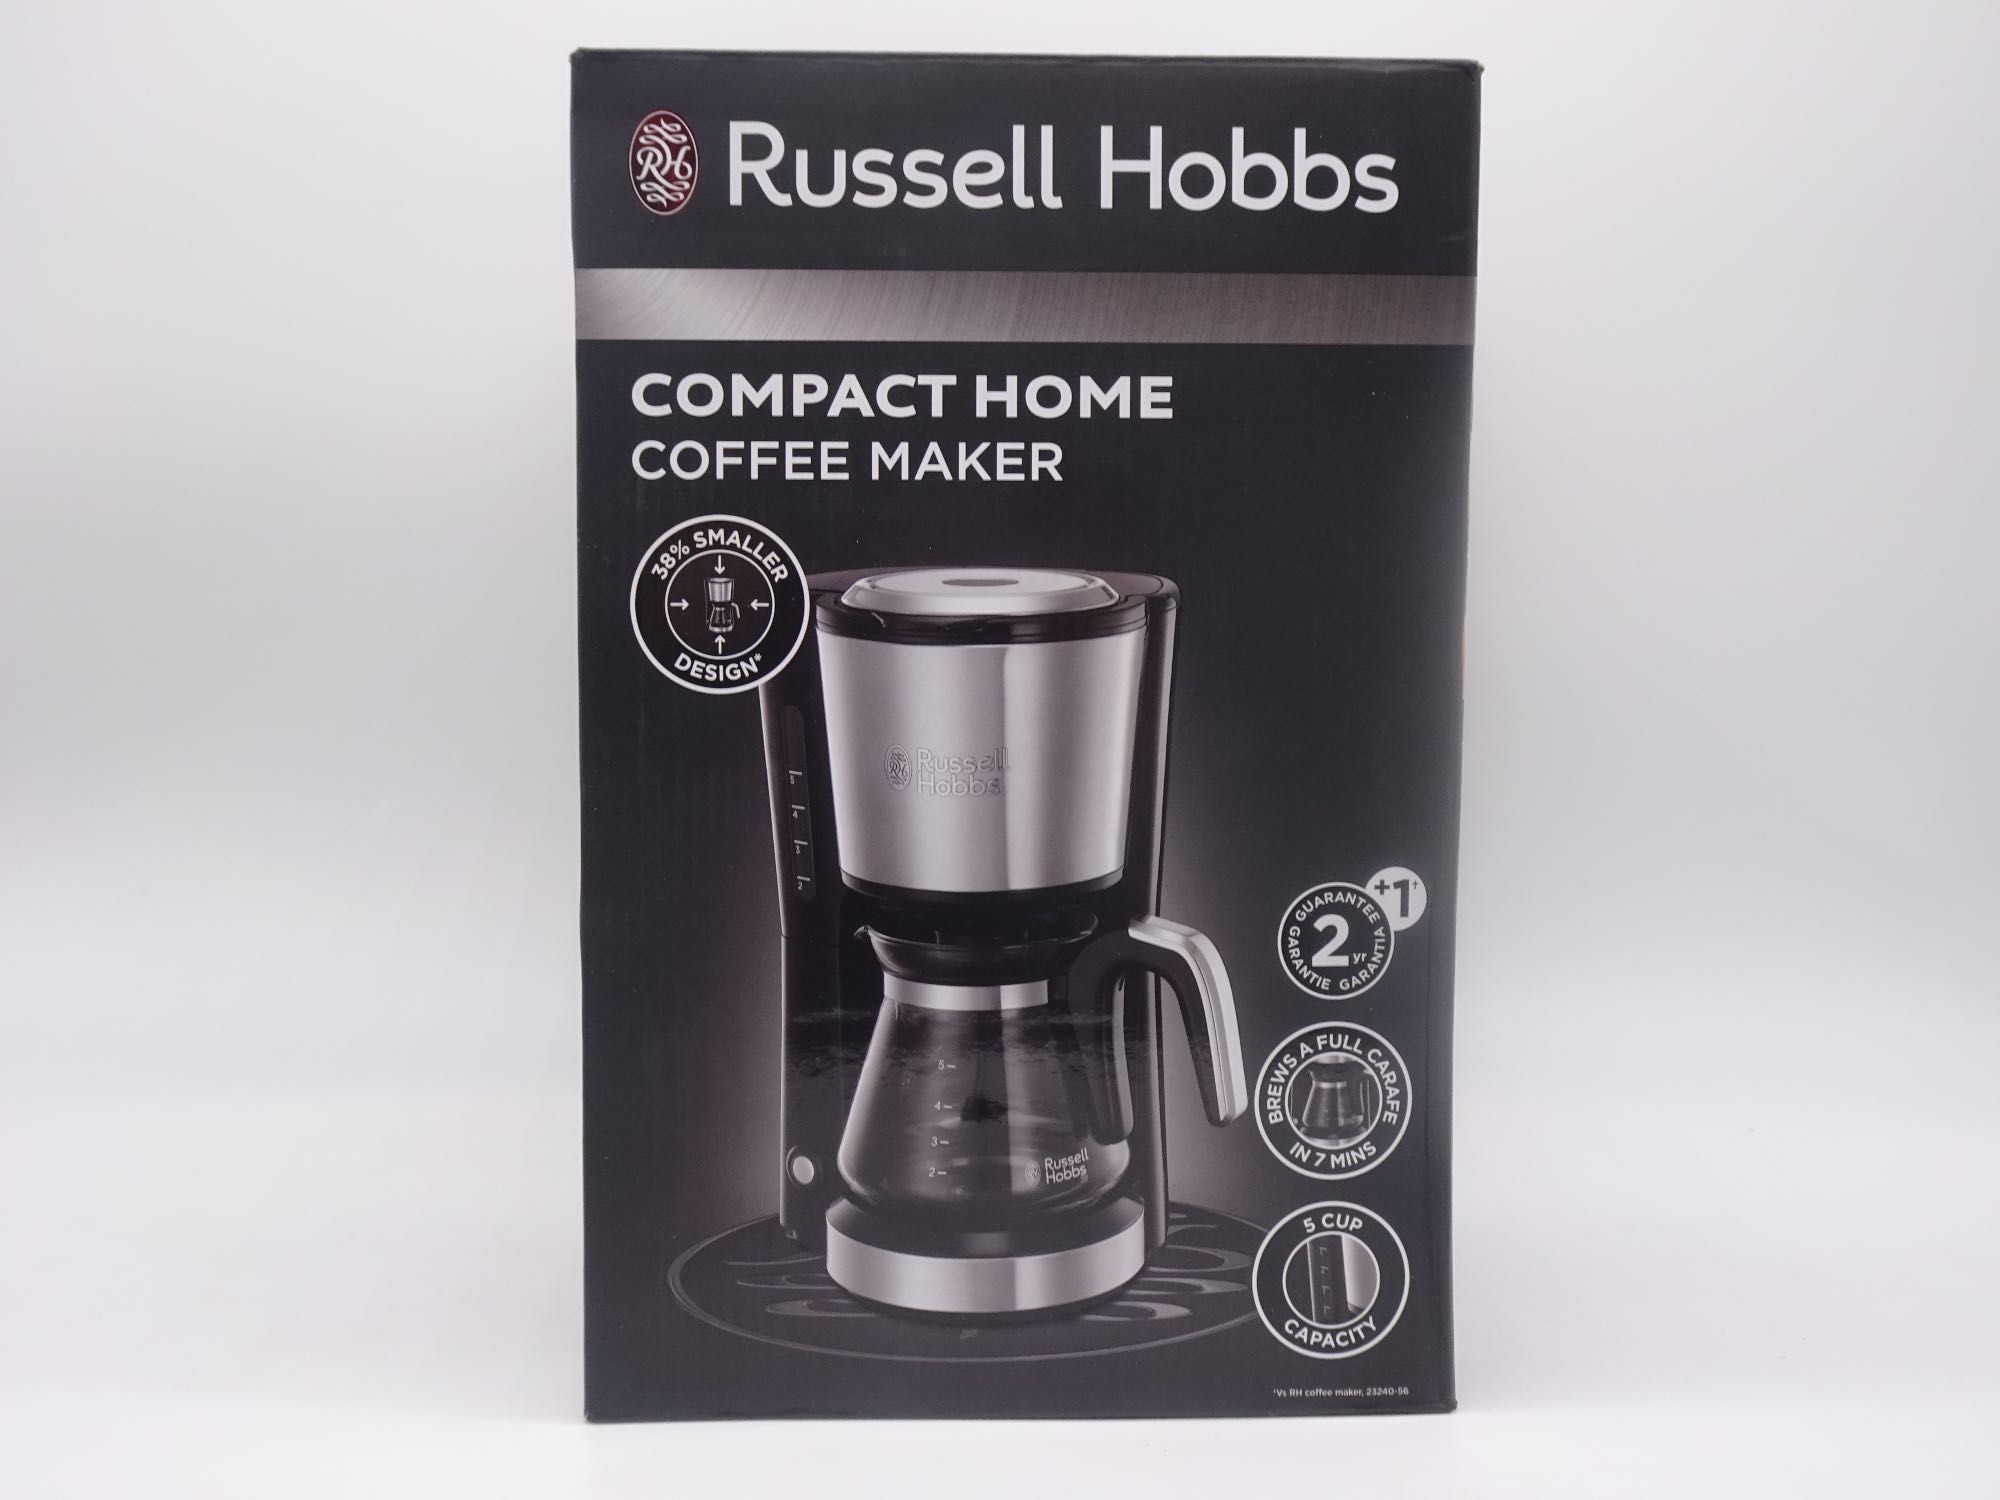 Cafetiera Russell Hobbs Compact Home hard